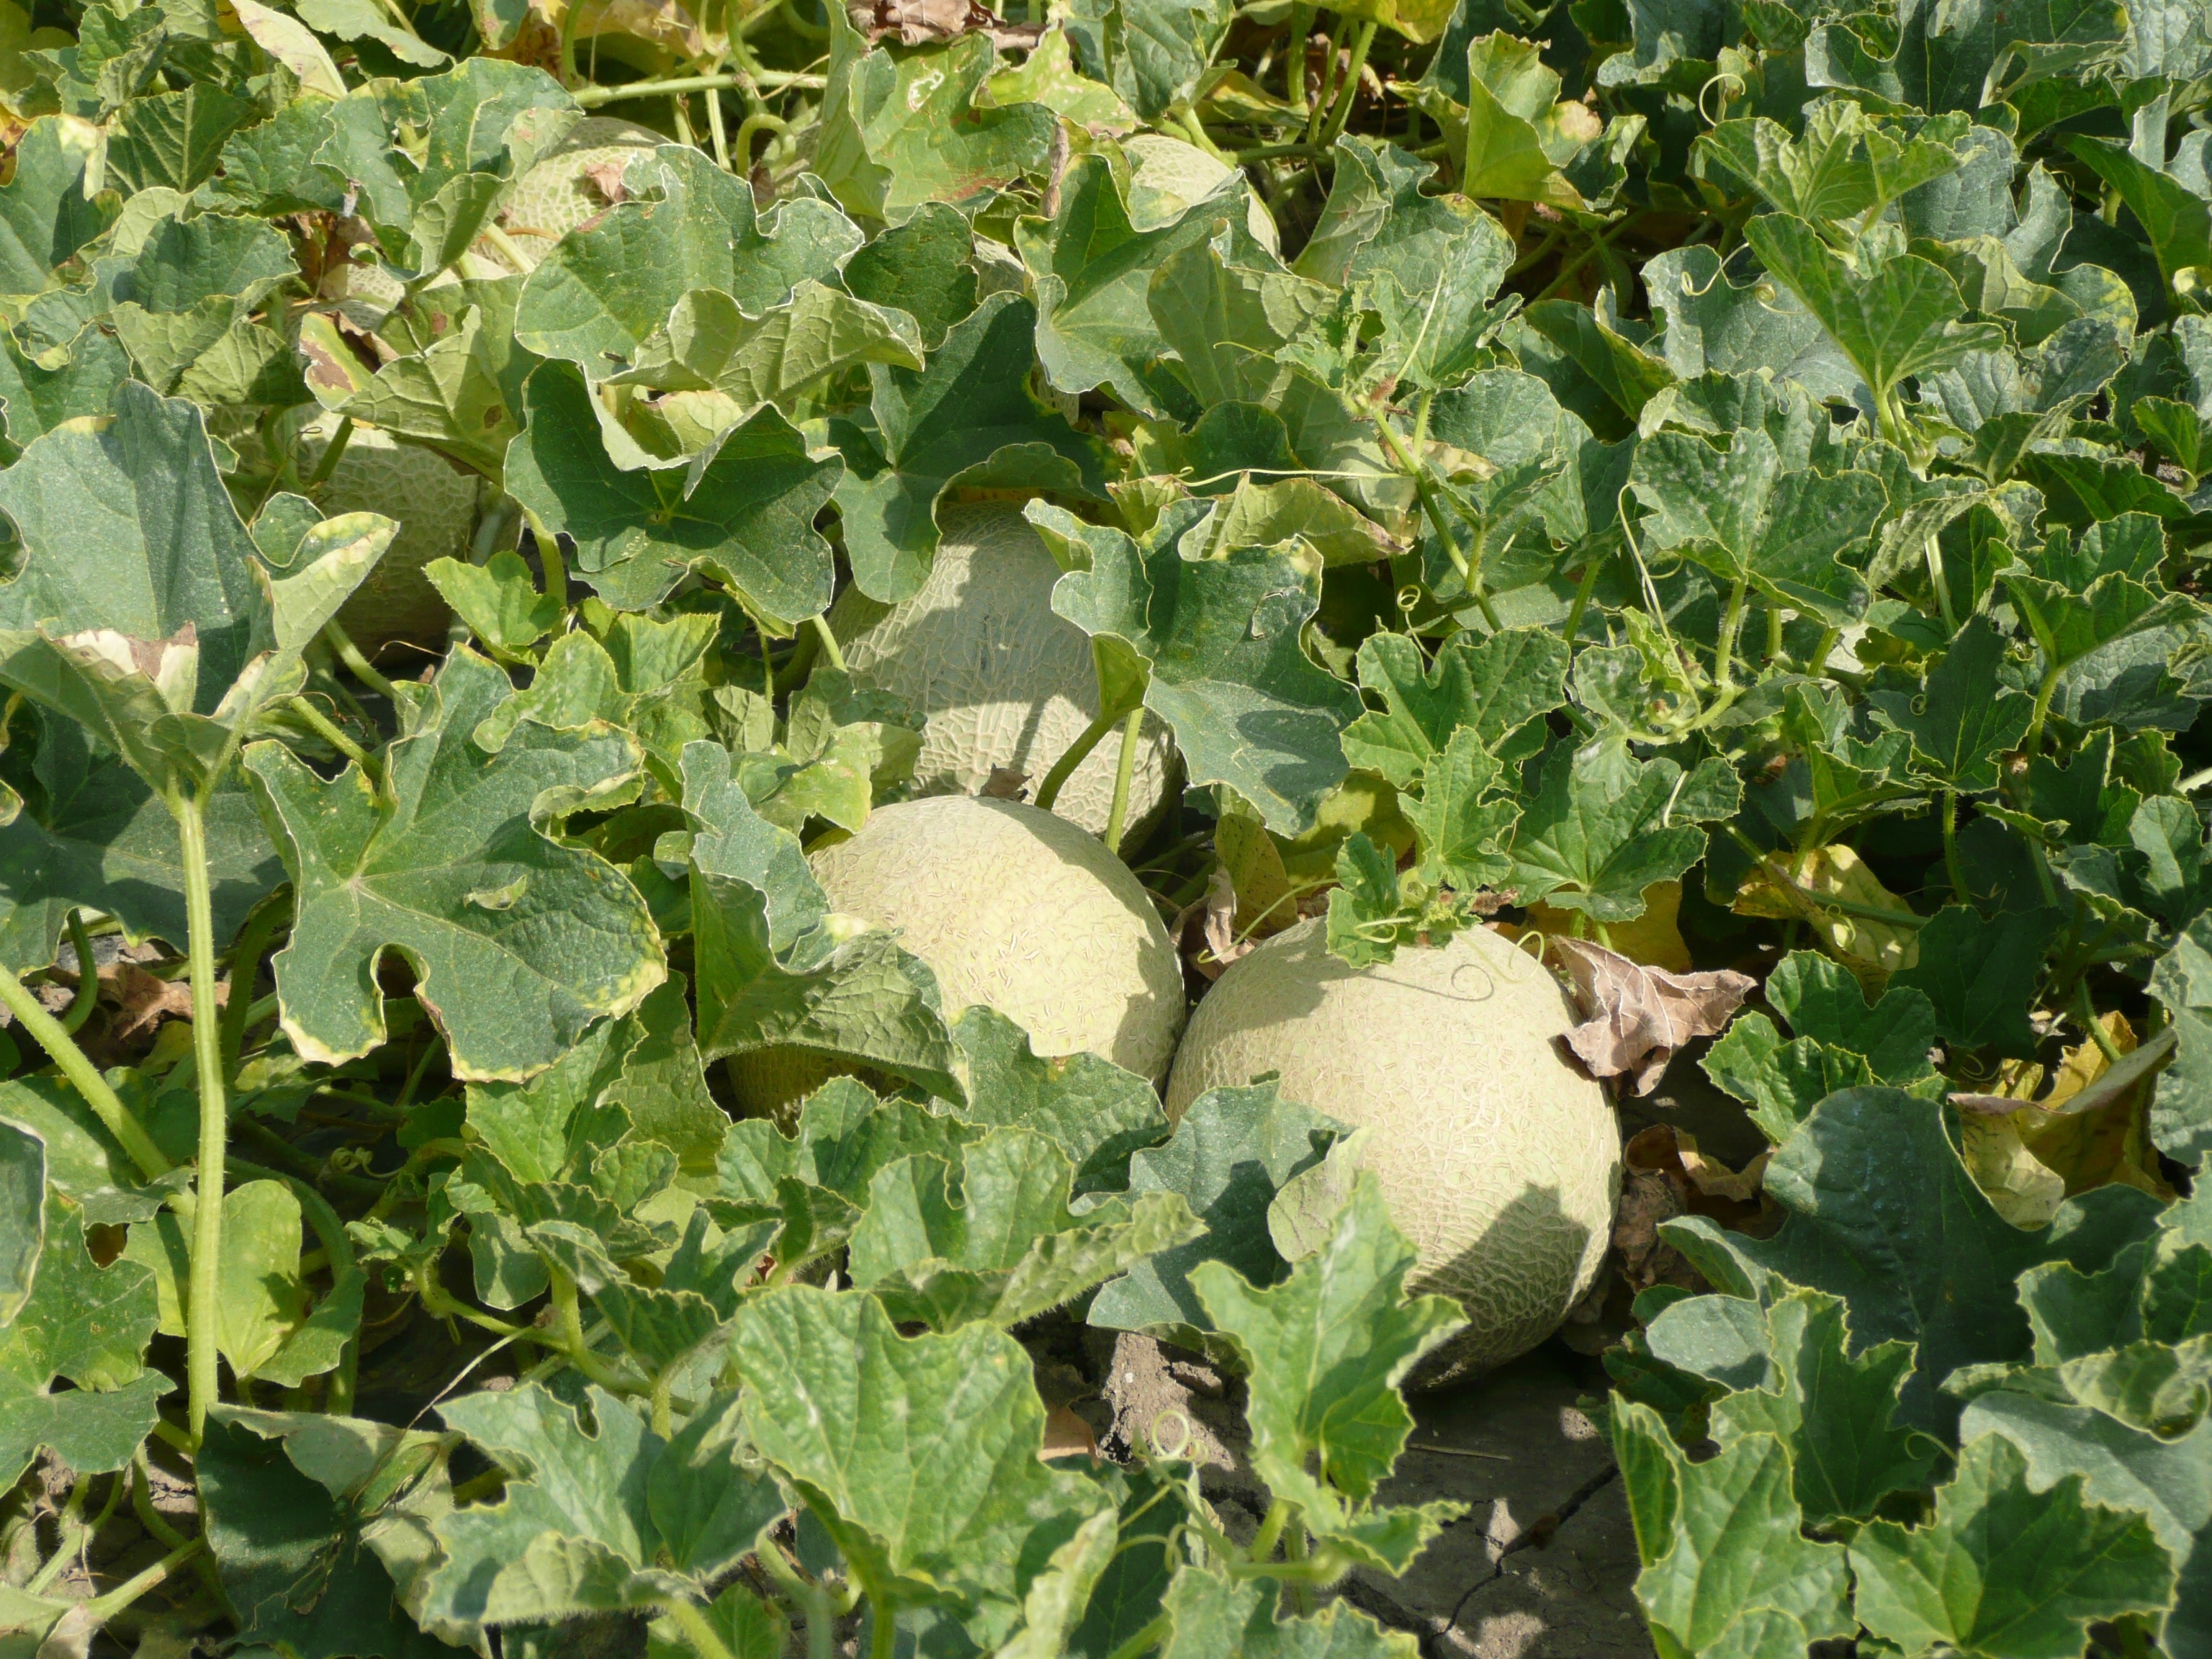 Agriculture, Cultivation, Melons, Field, vegetable, leaf